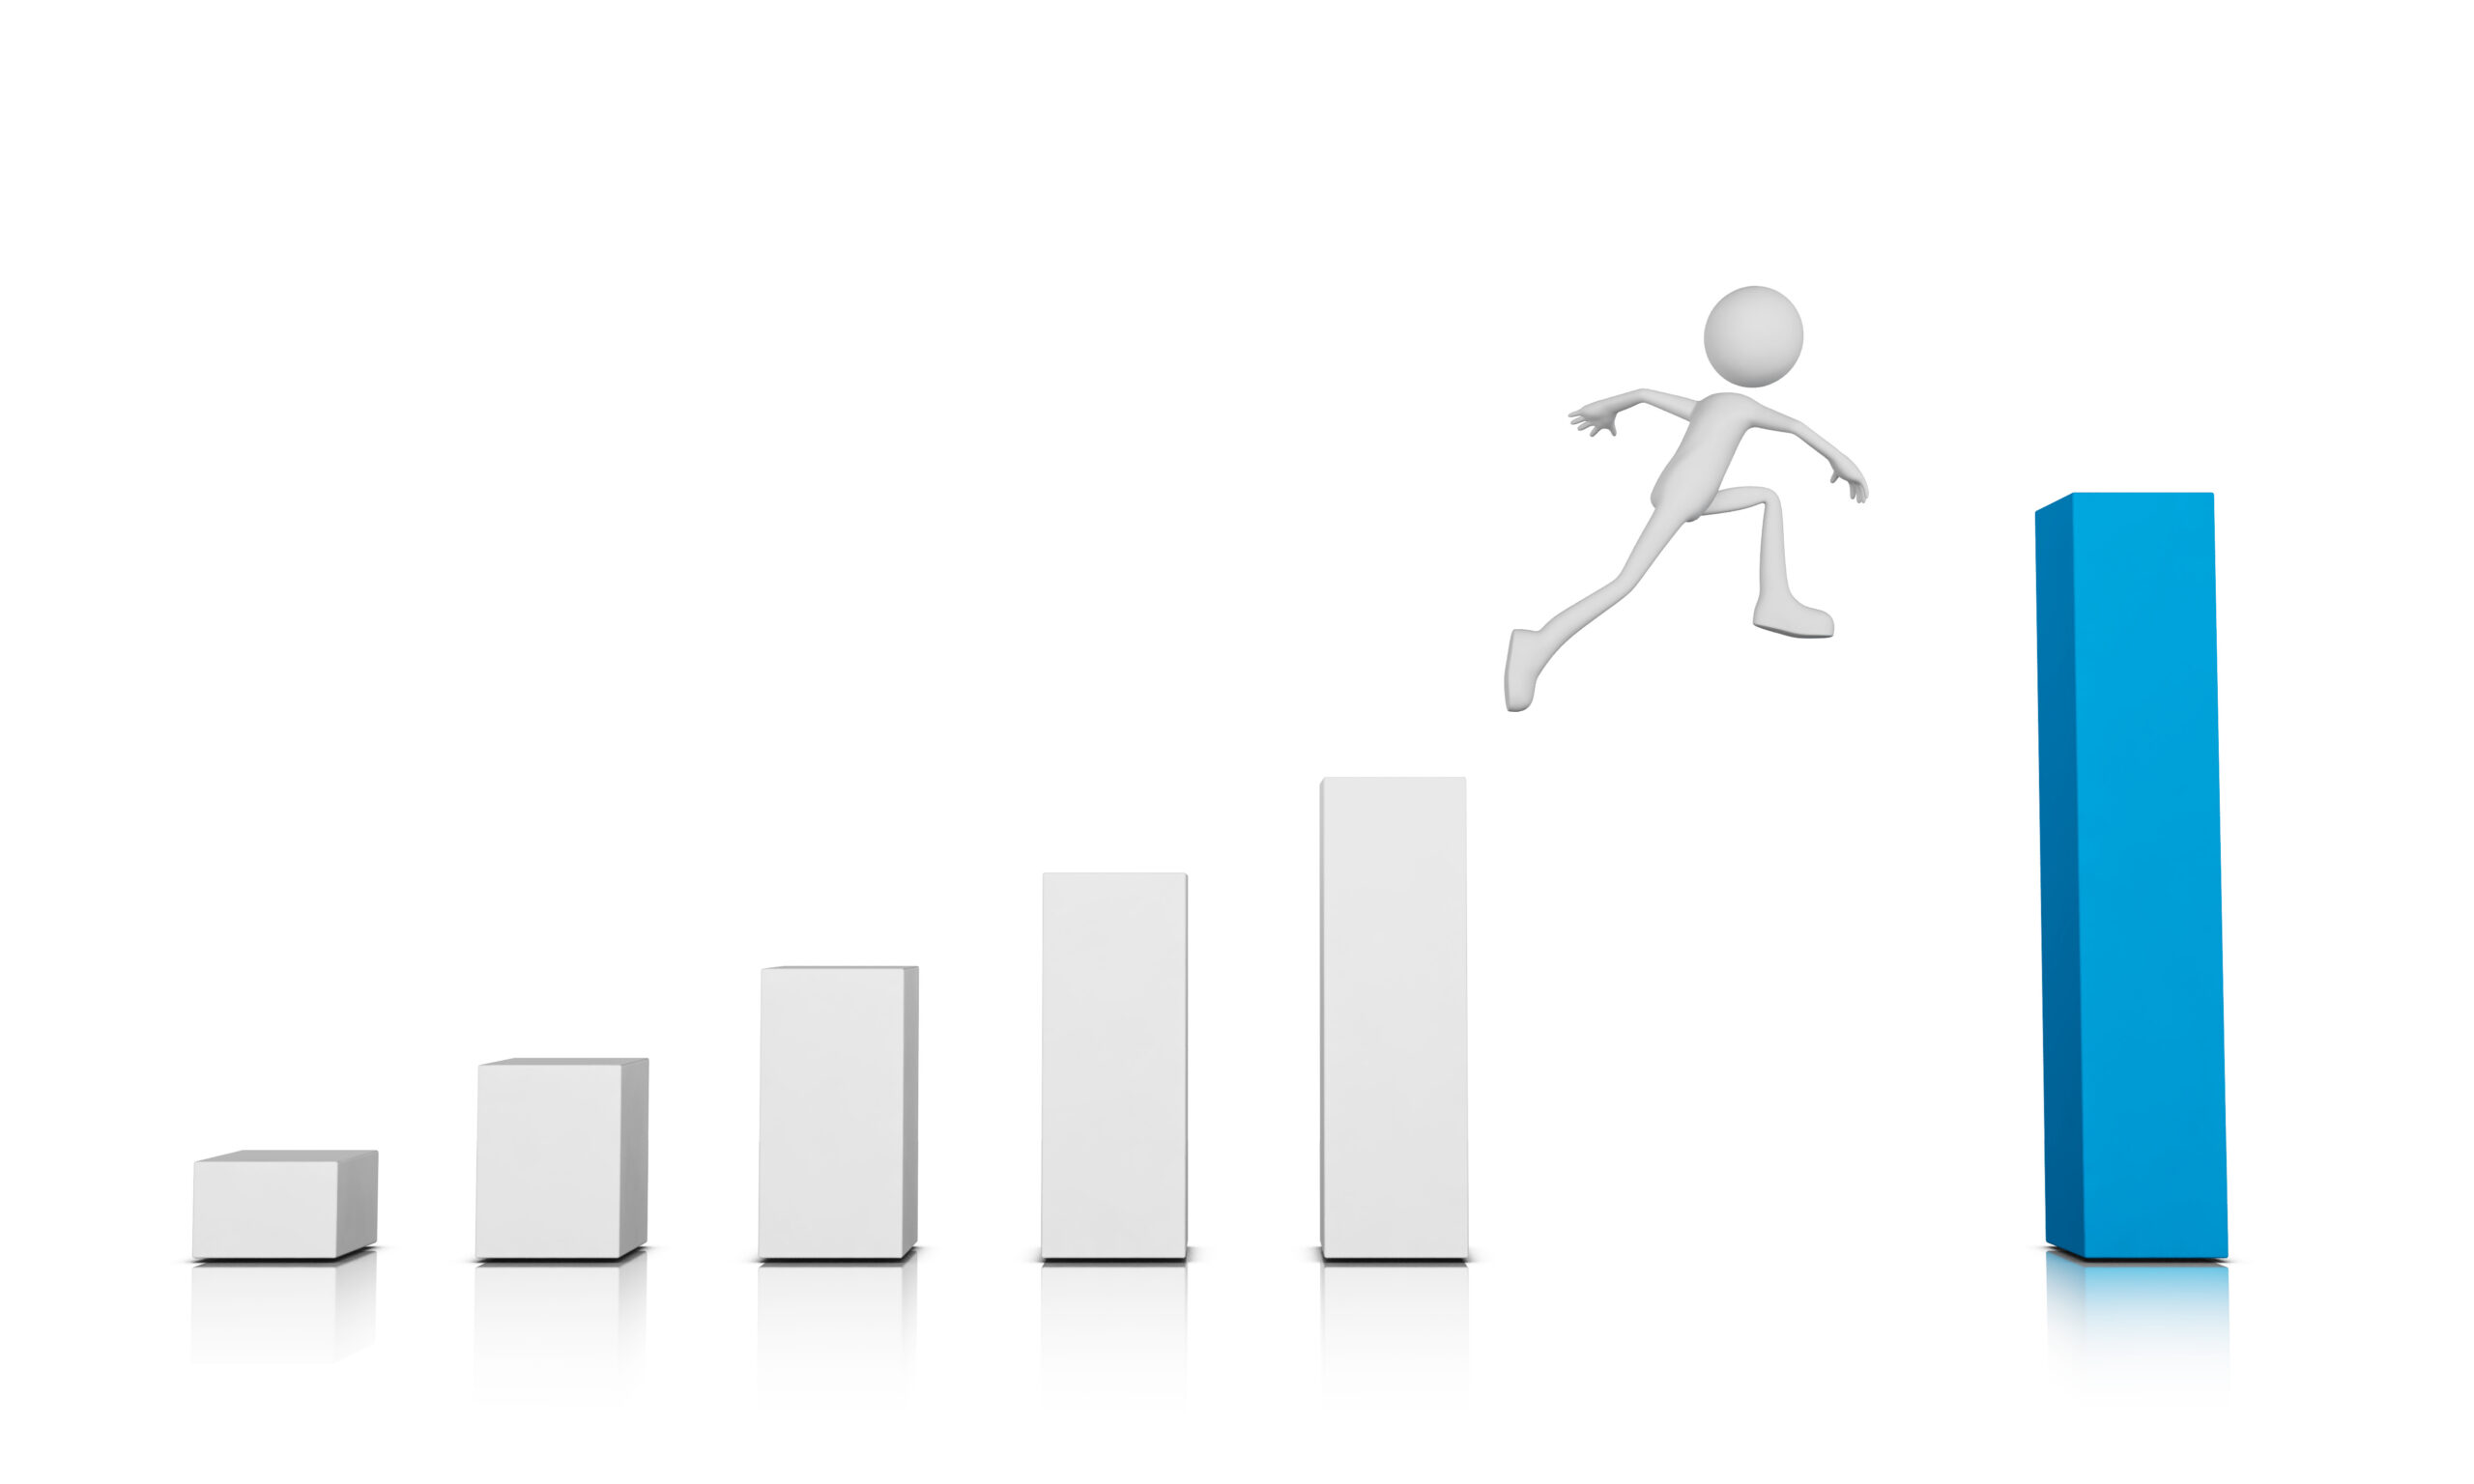 A person jumping towards the top of the bar graph